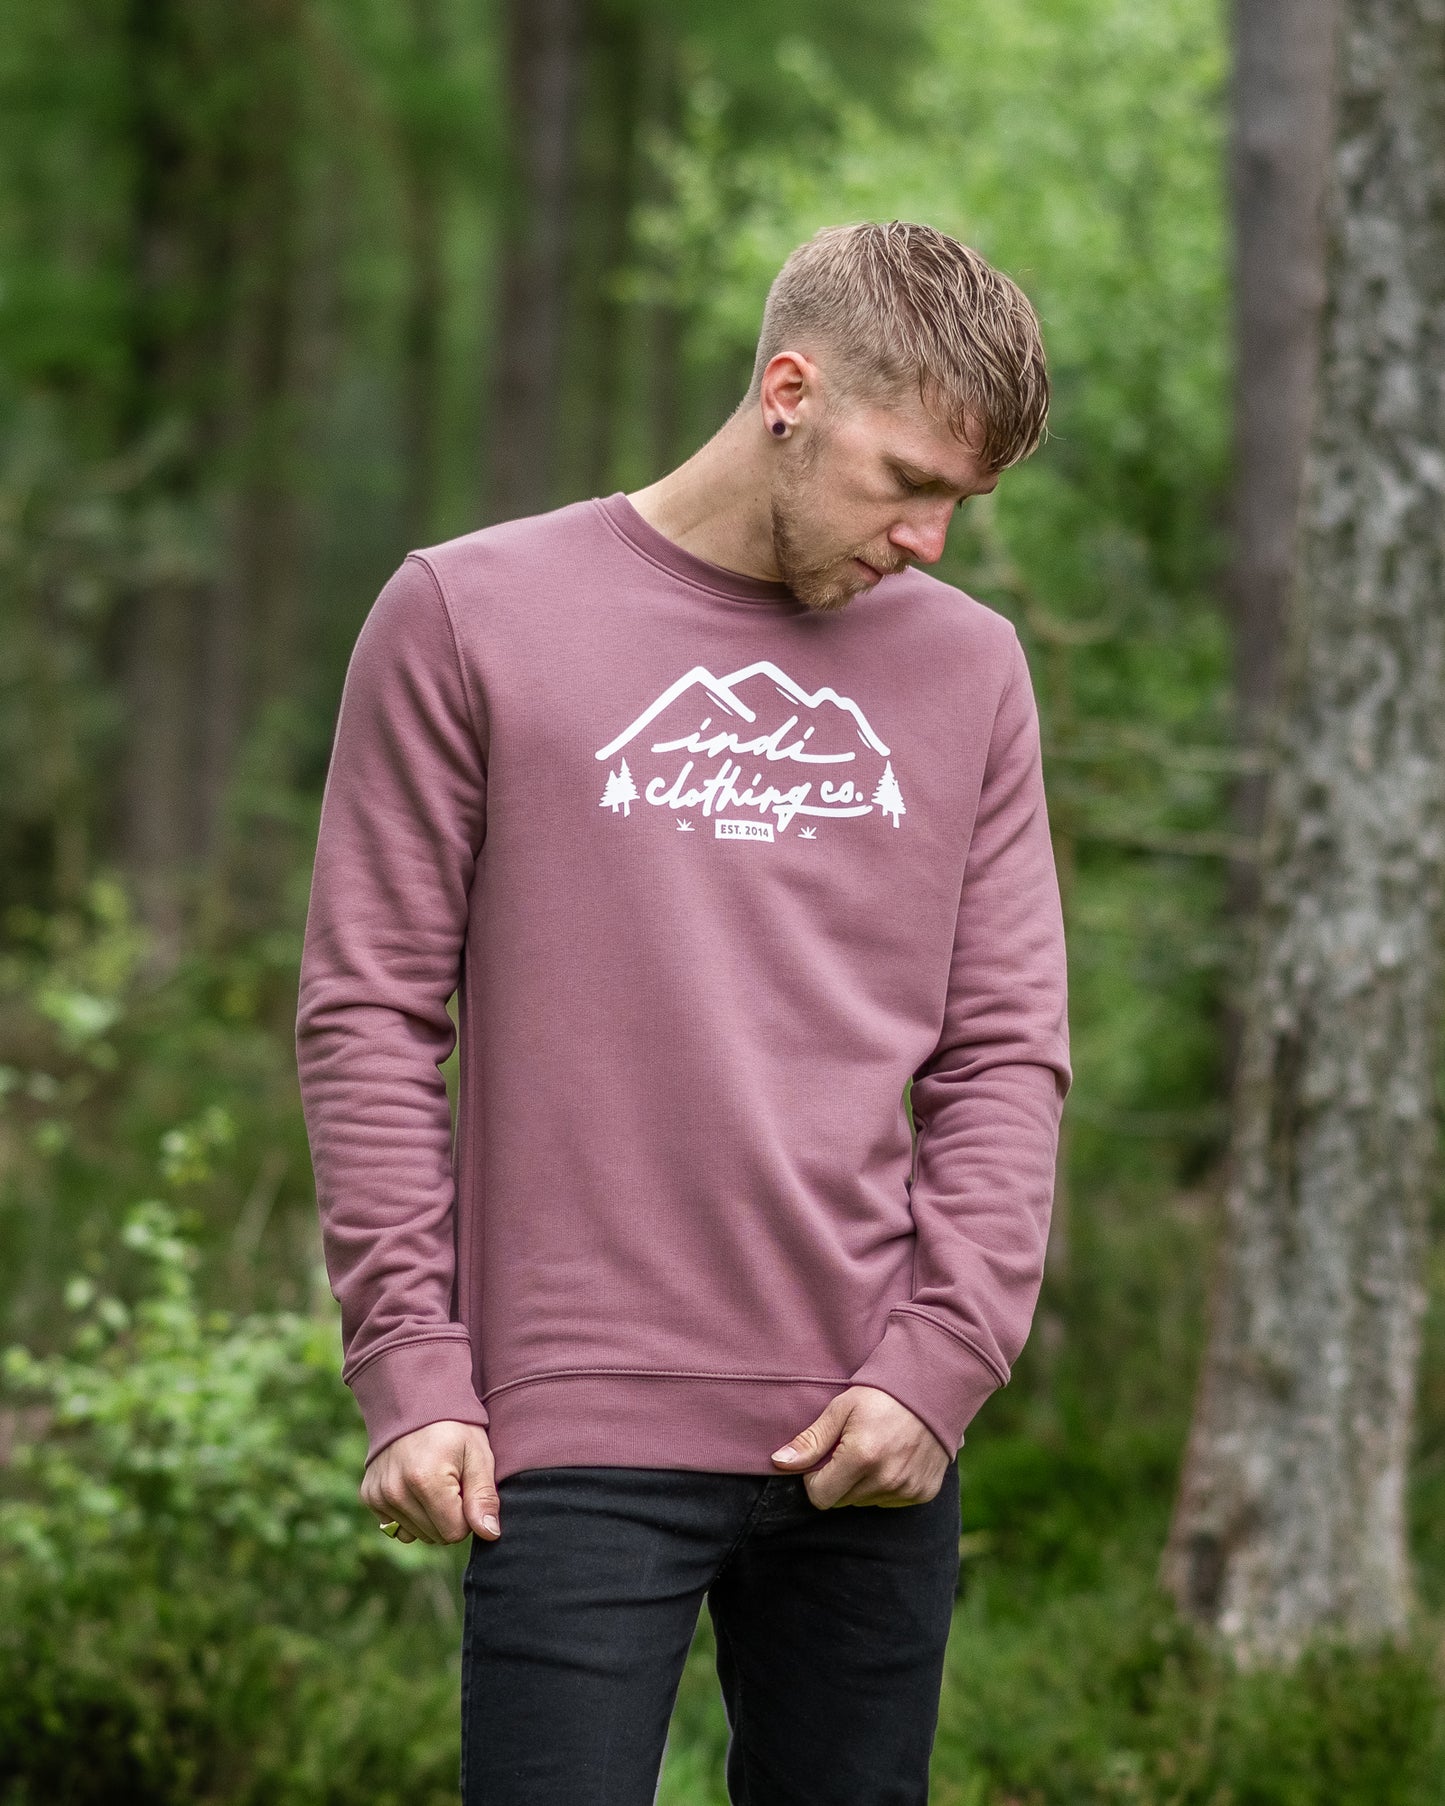 The Mountainscape Deluxe Sweater in Dusty Mauve